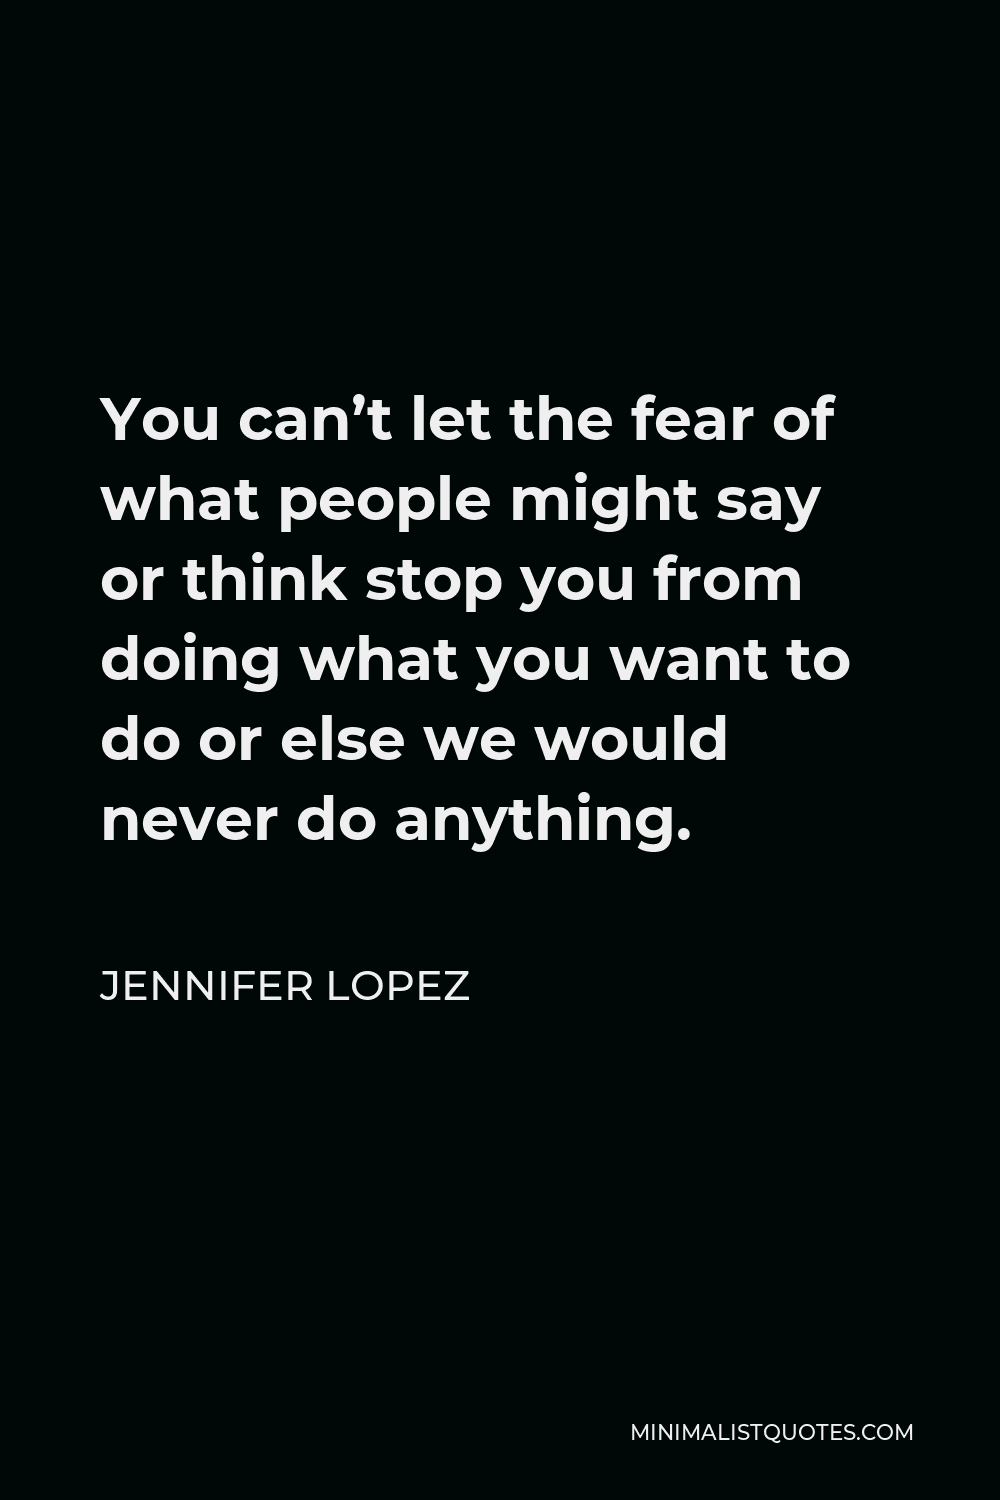 Jennifer Lopez Quote - You can’t let the fear of what people might say or think stop you from doing what you want to do or else we would never do anything.